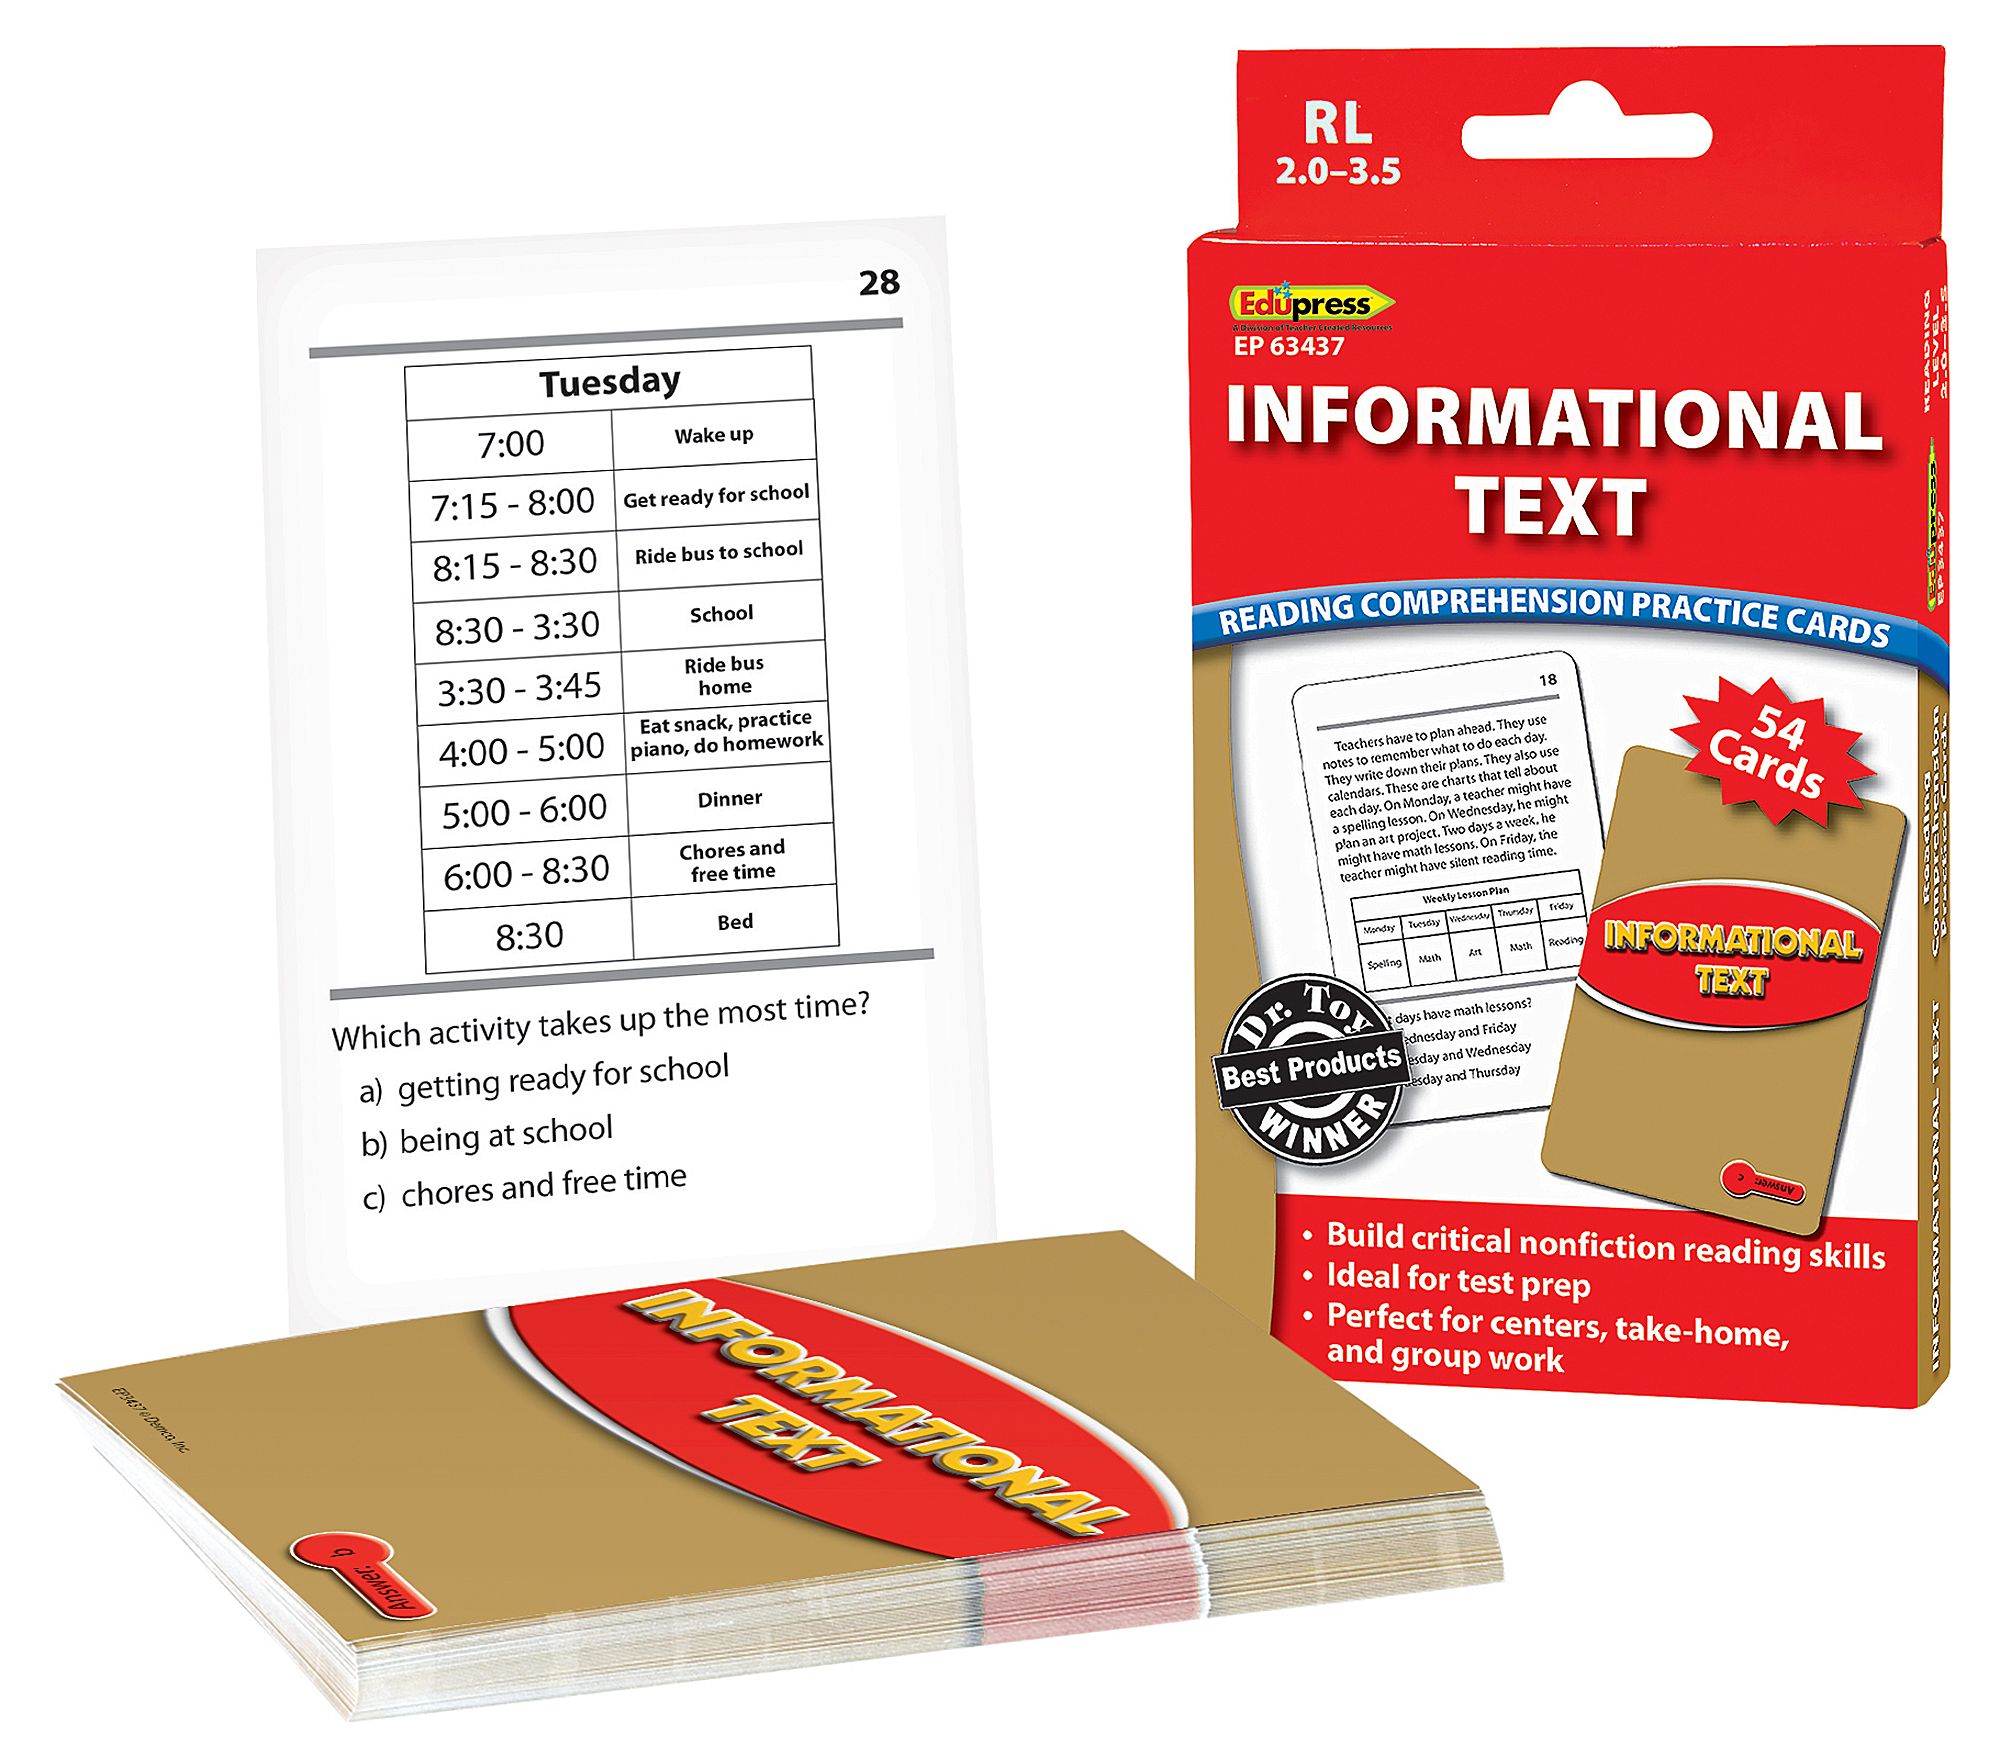 Reading Comprehension Practice Cards: Informational Text (Red Level)